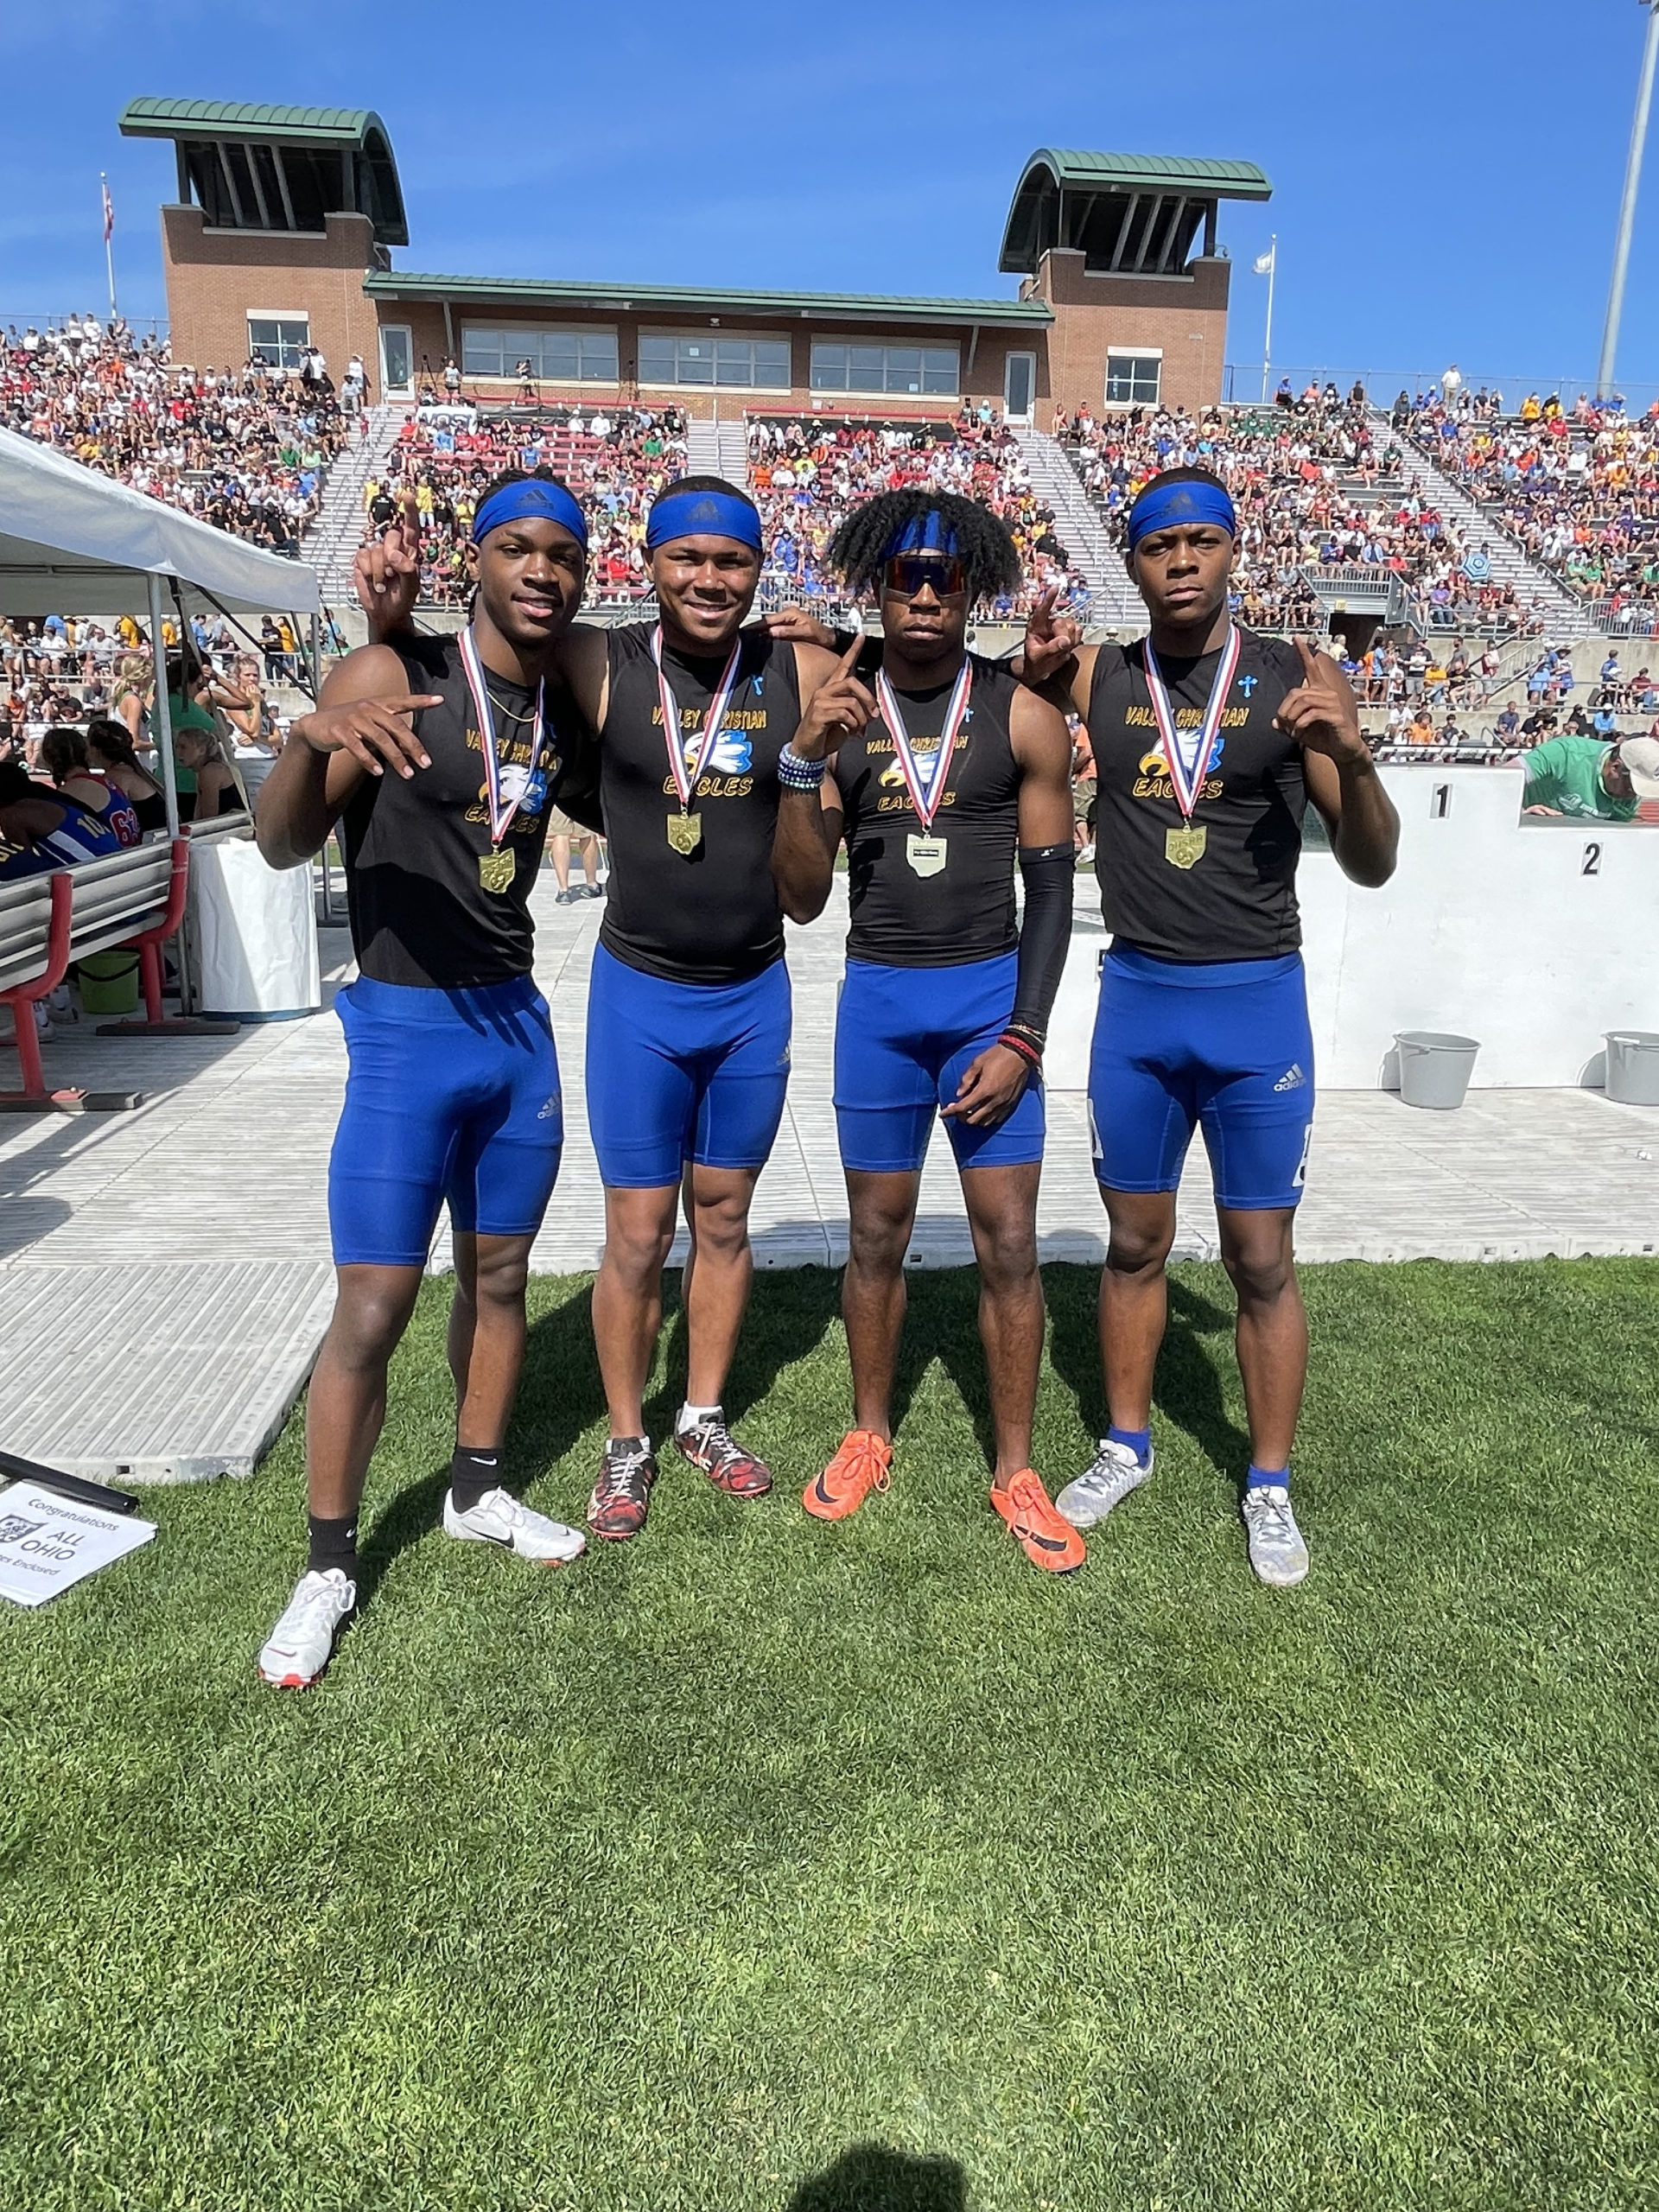 Valley Christian Boys Bring Home Gold in D3 4 x 100 Meter Relay